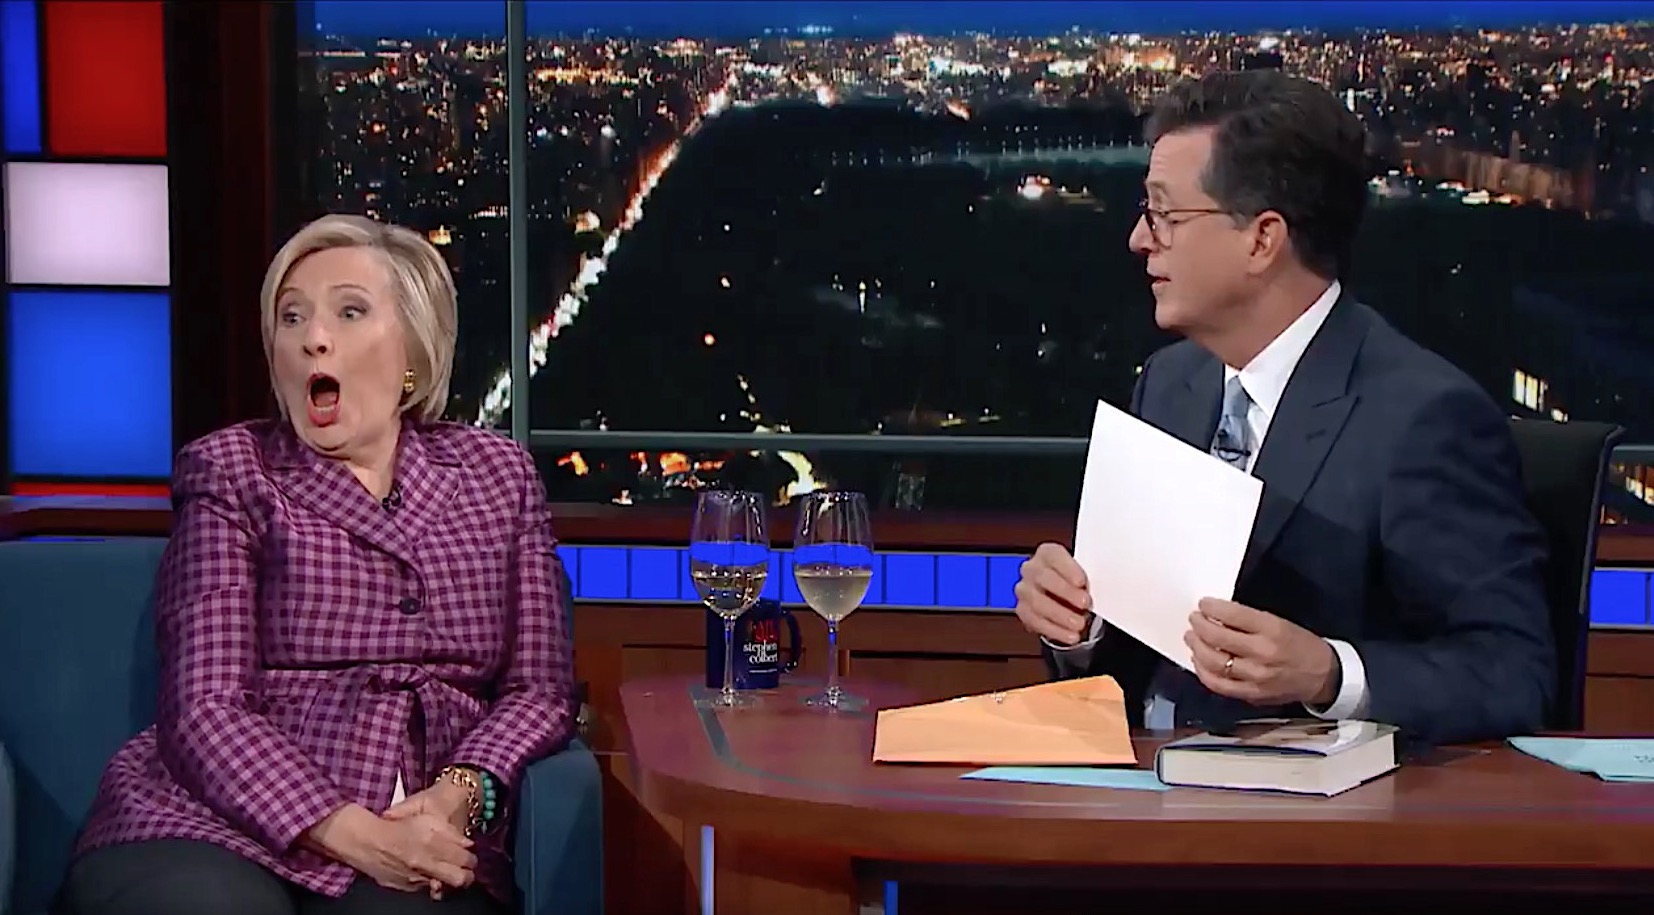 Stephen Colbert has a gift for Hillary Clinton